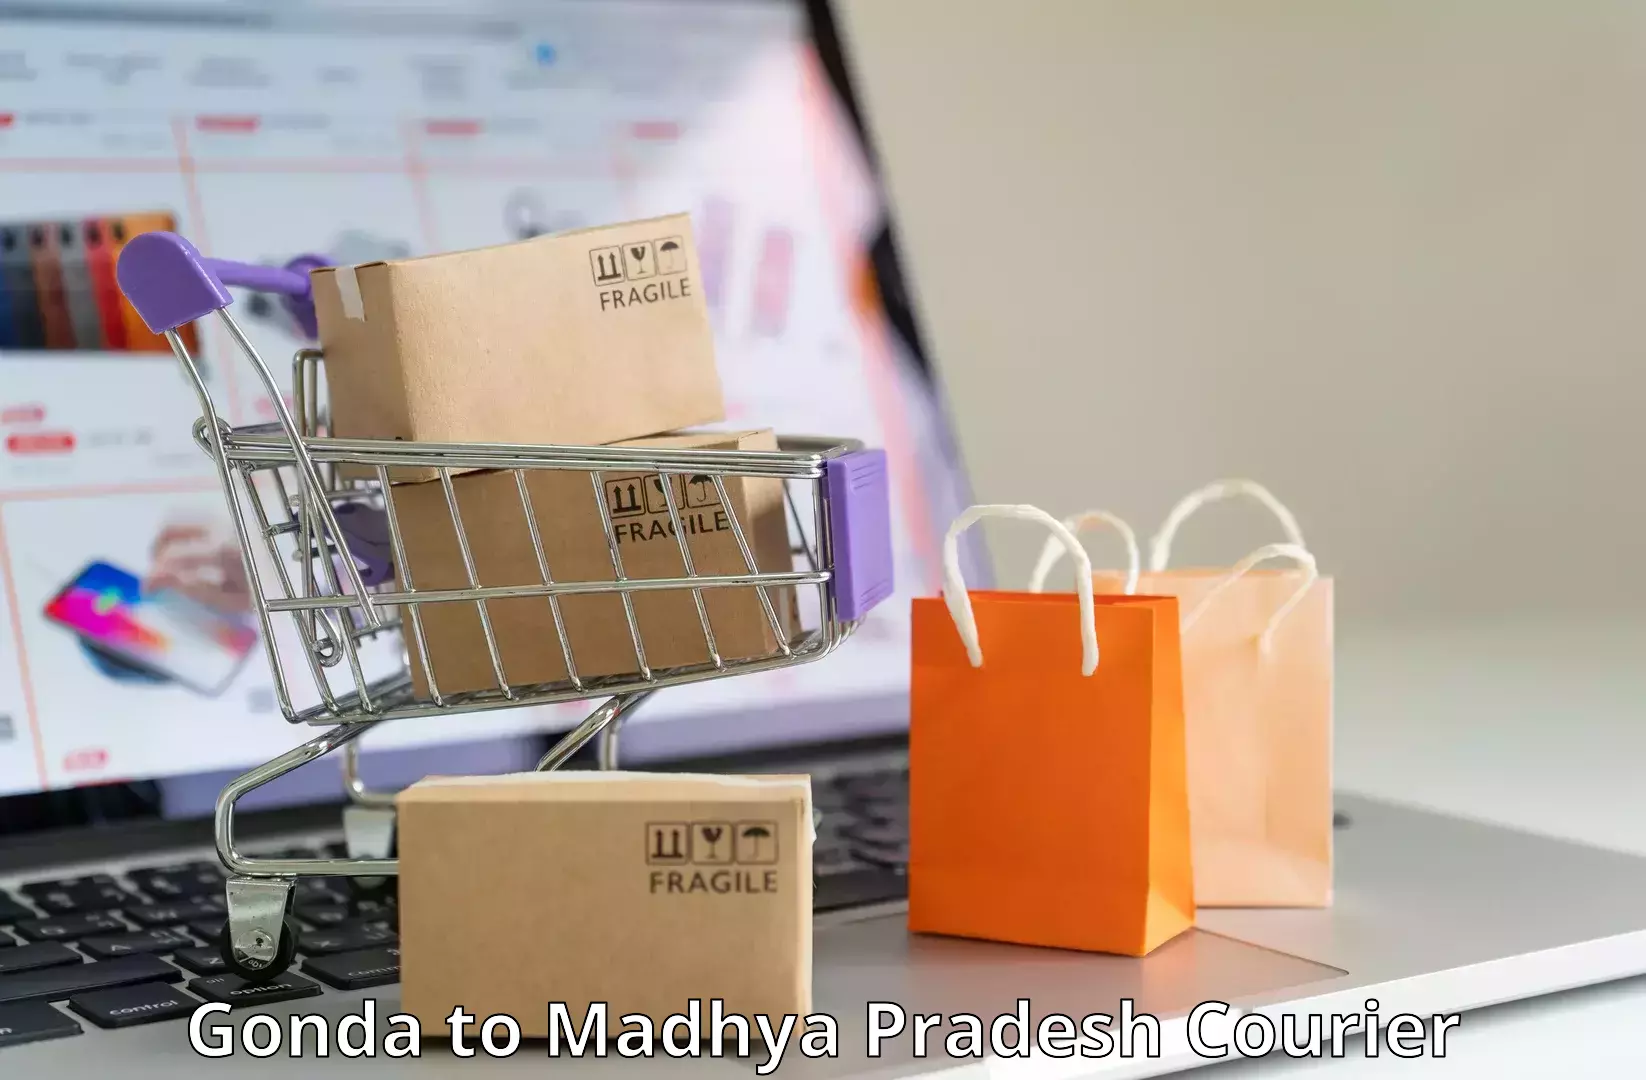 Courier insurance Gonda to Athner